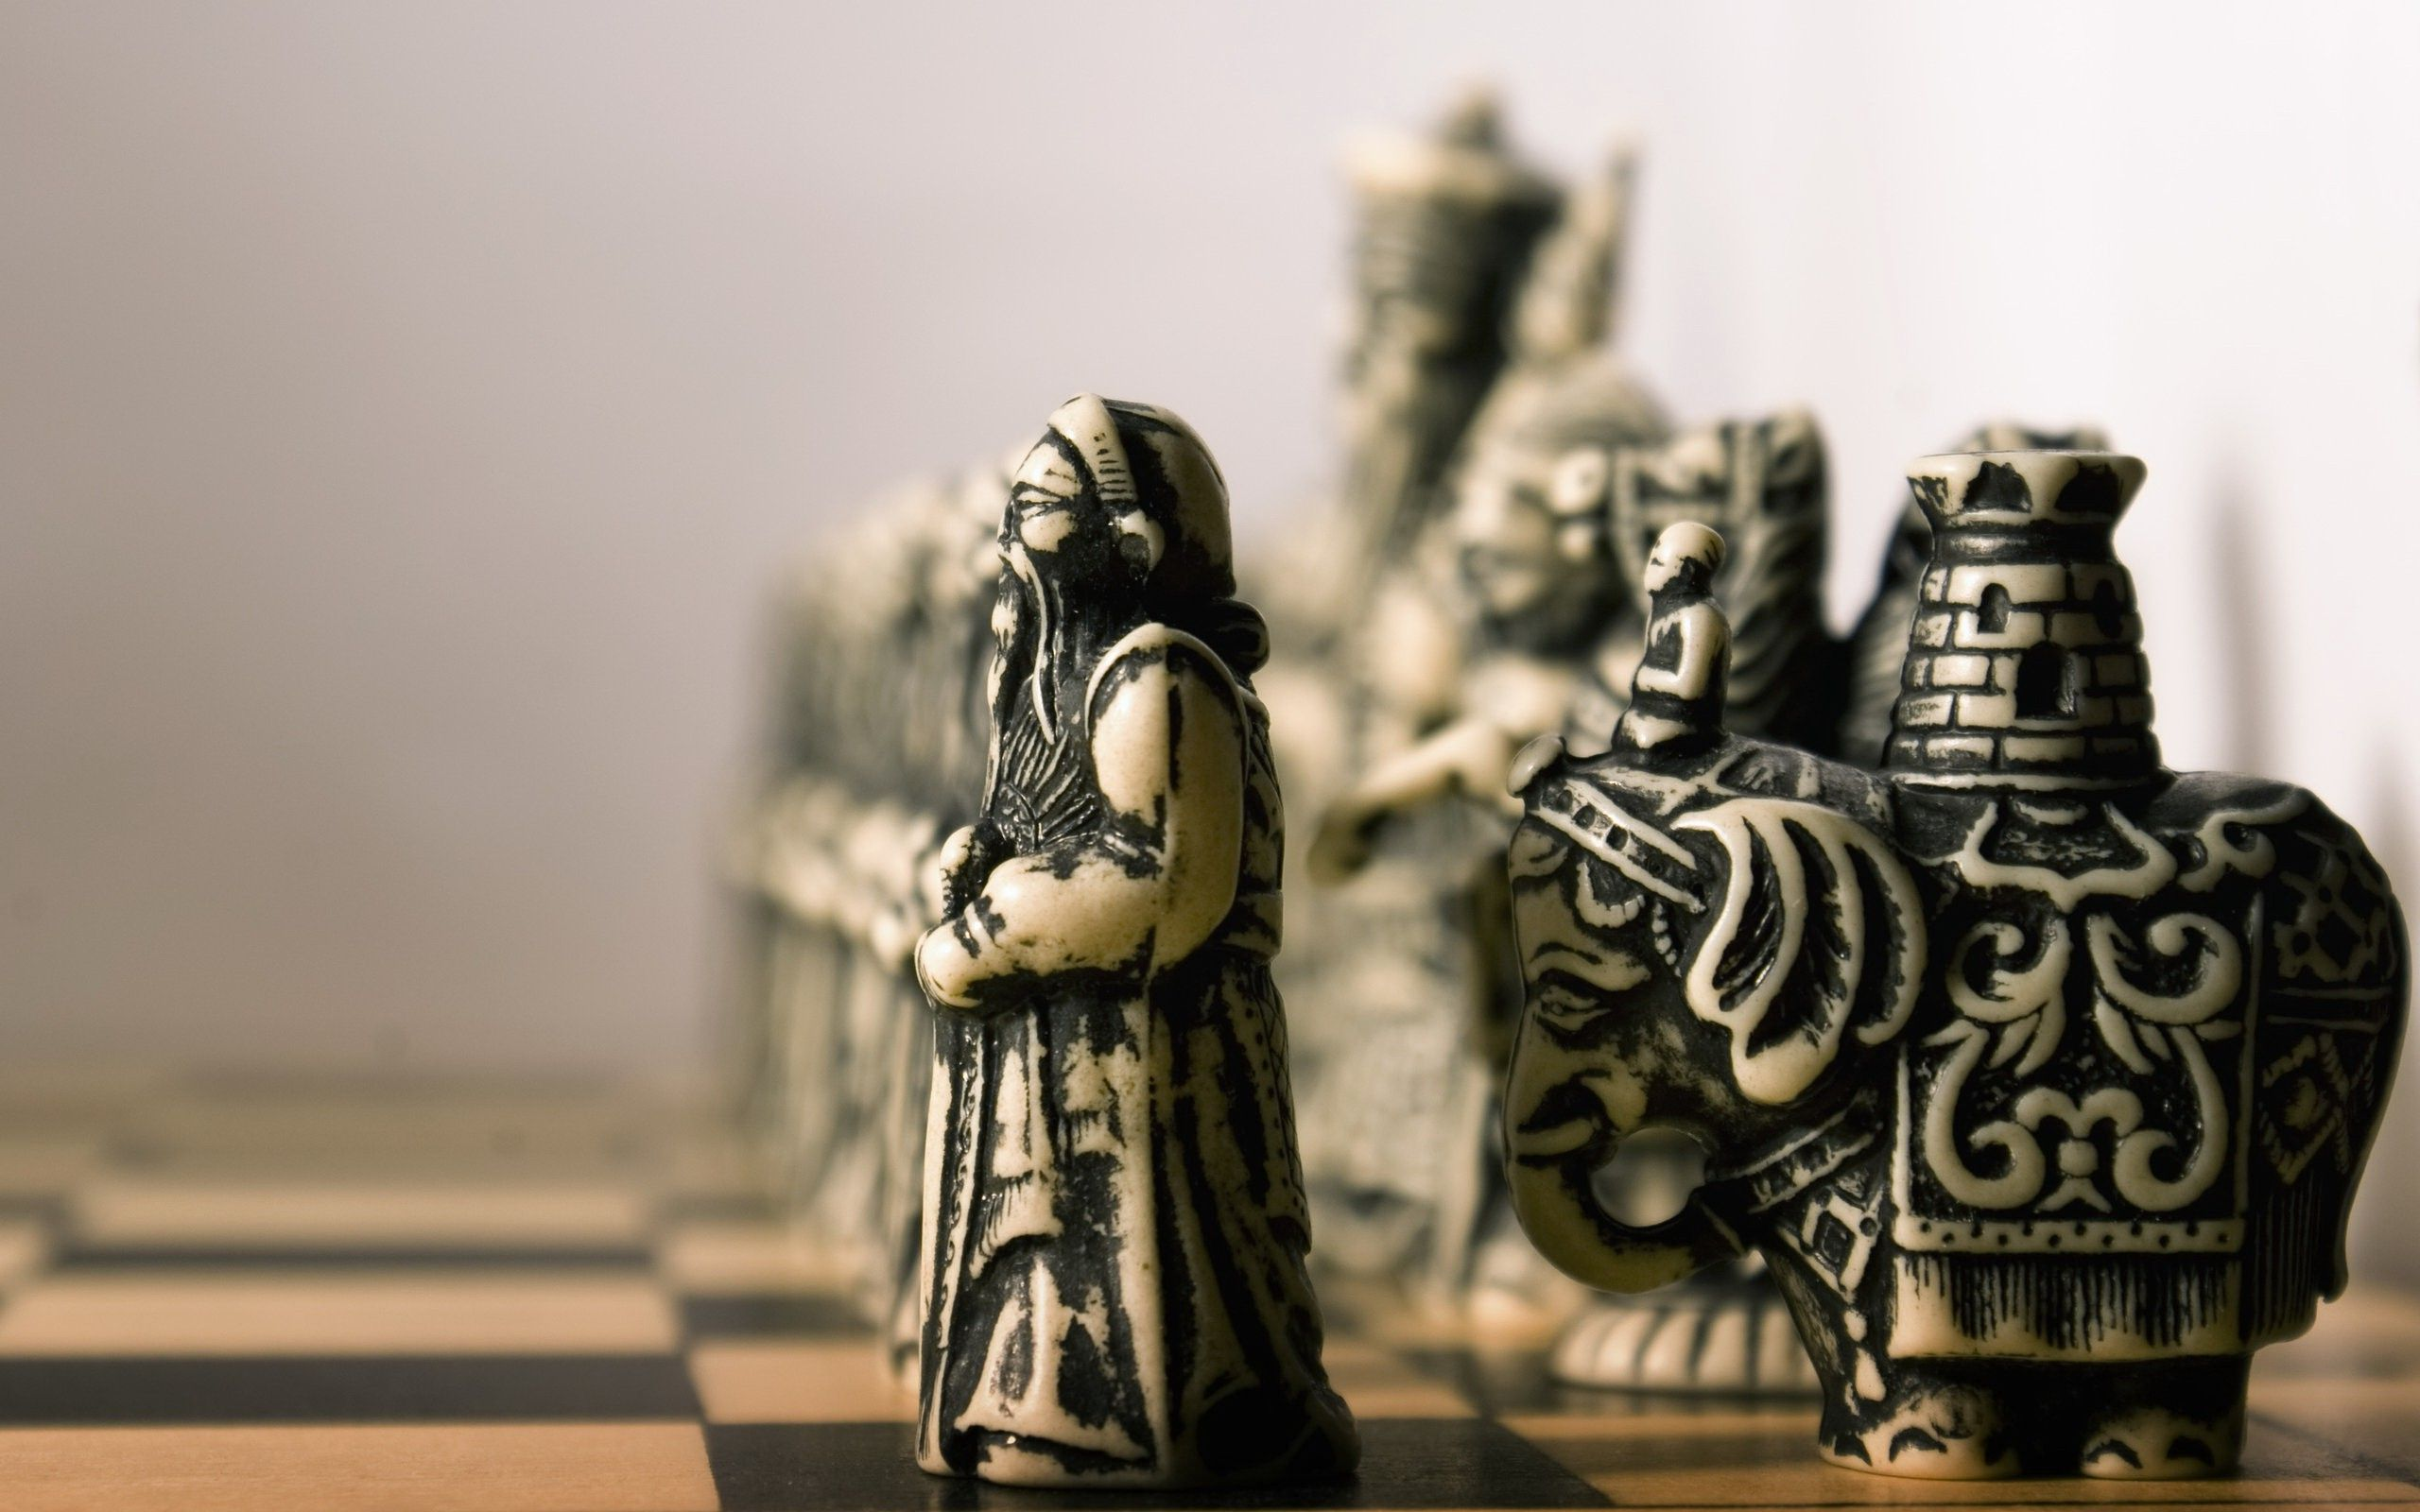 General 2560x1600 photography macro chess figurines board games